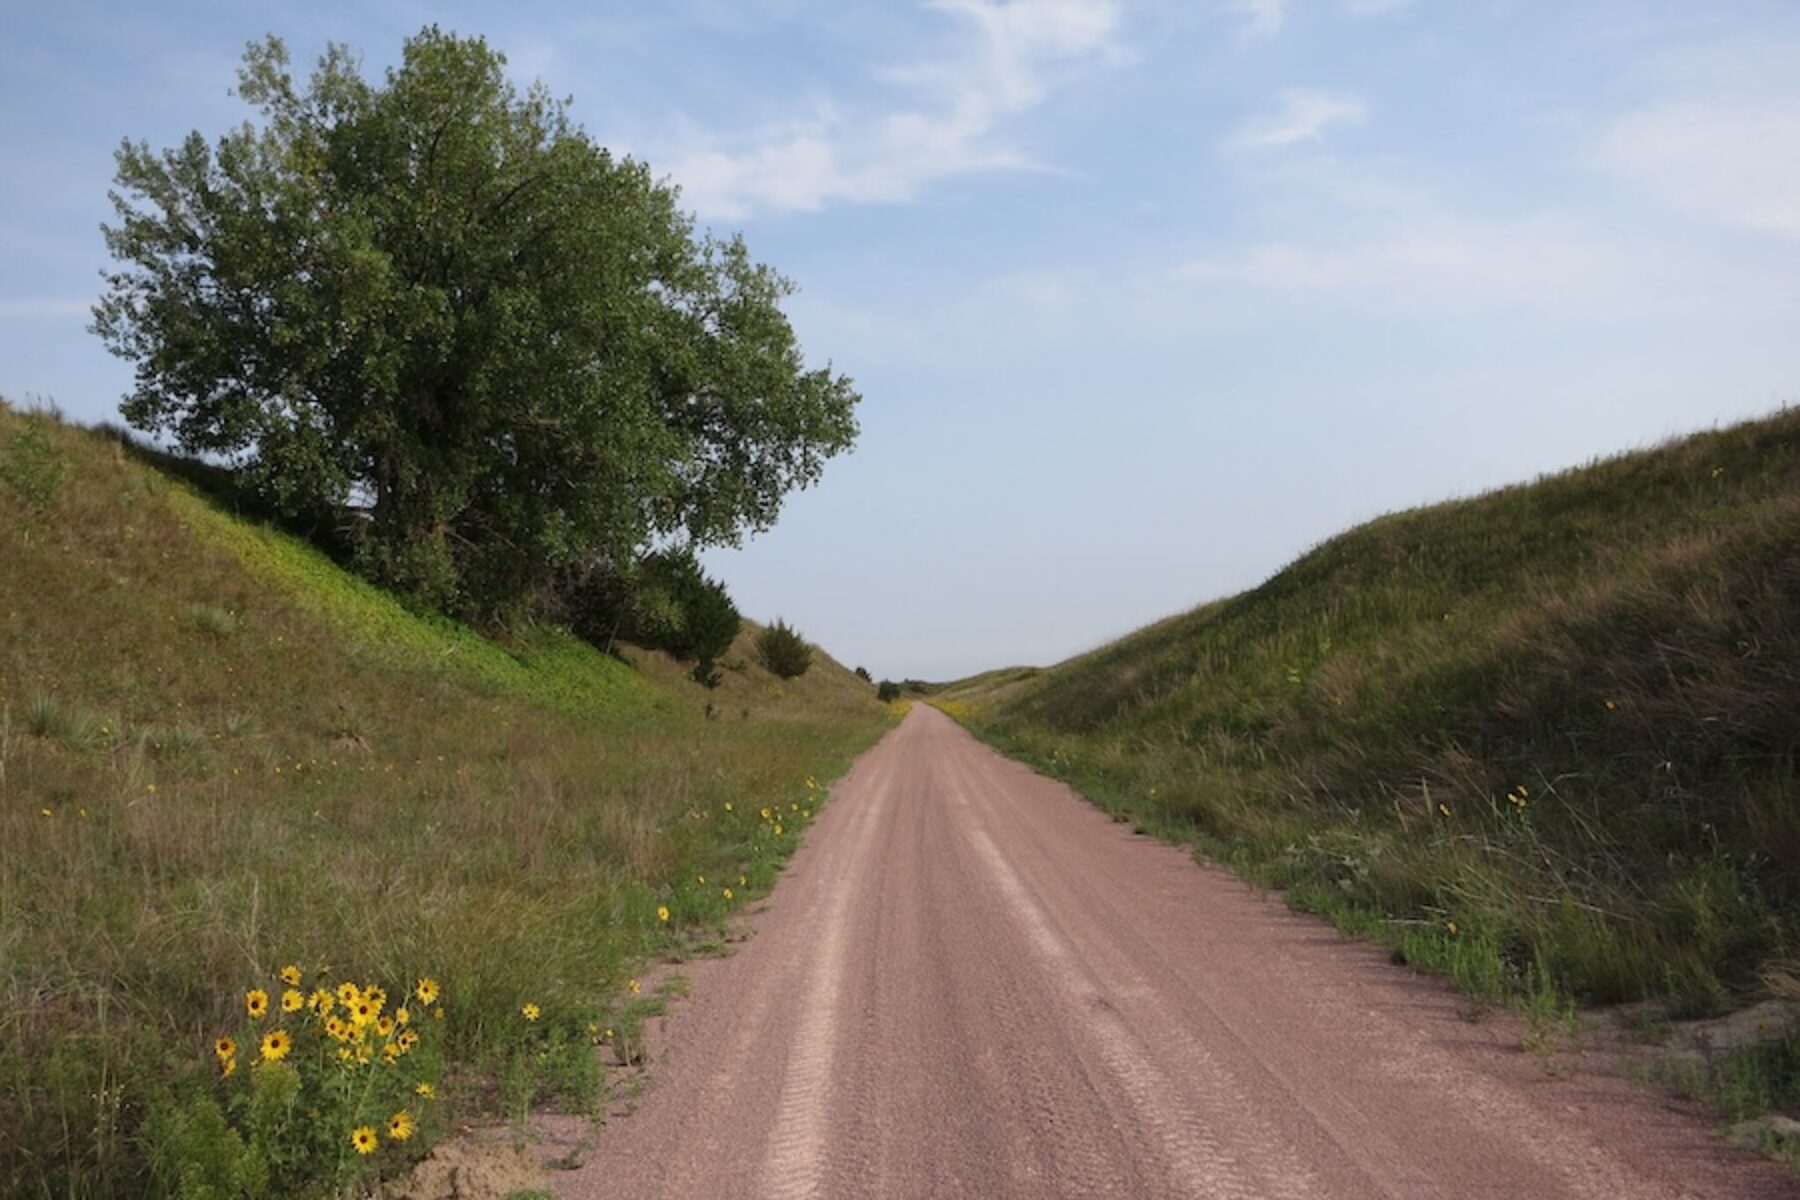 Nebraska’s Cowboy Recreation and Nature Trail | Photo by TrailLink user mbcallawa